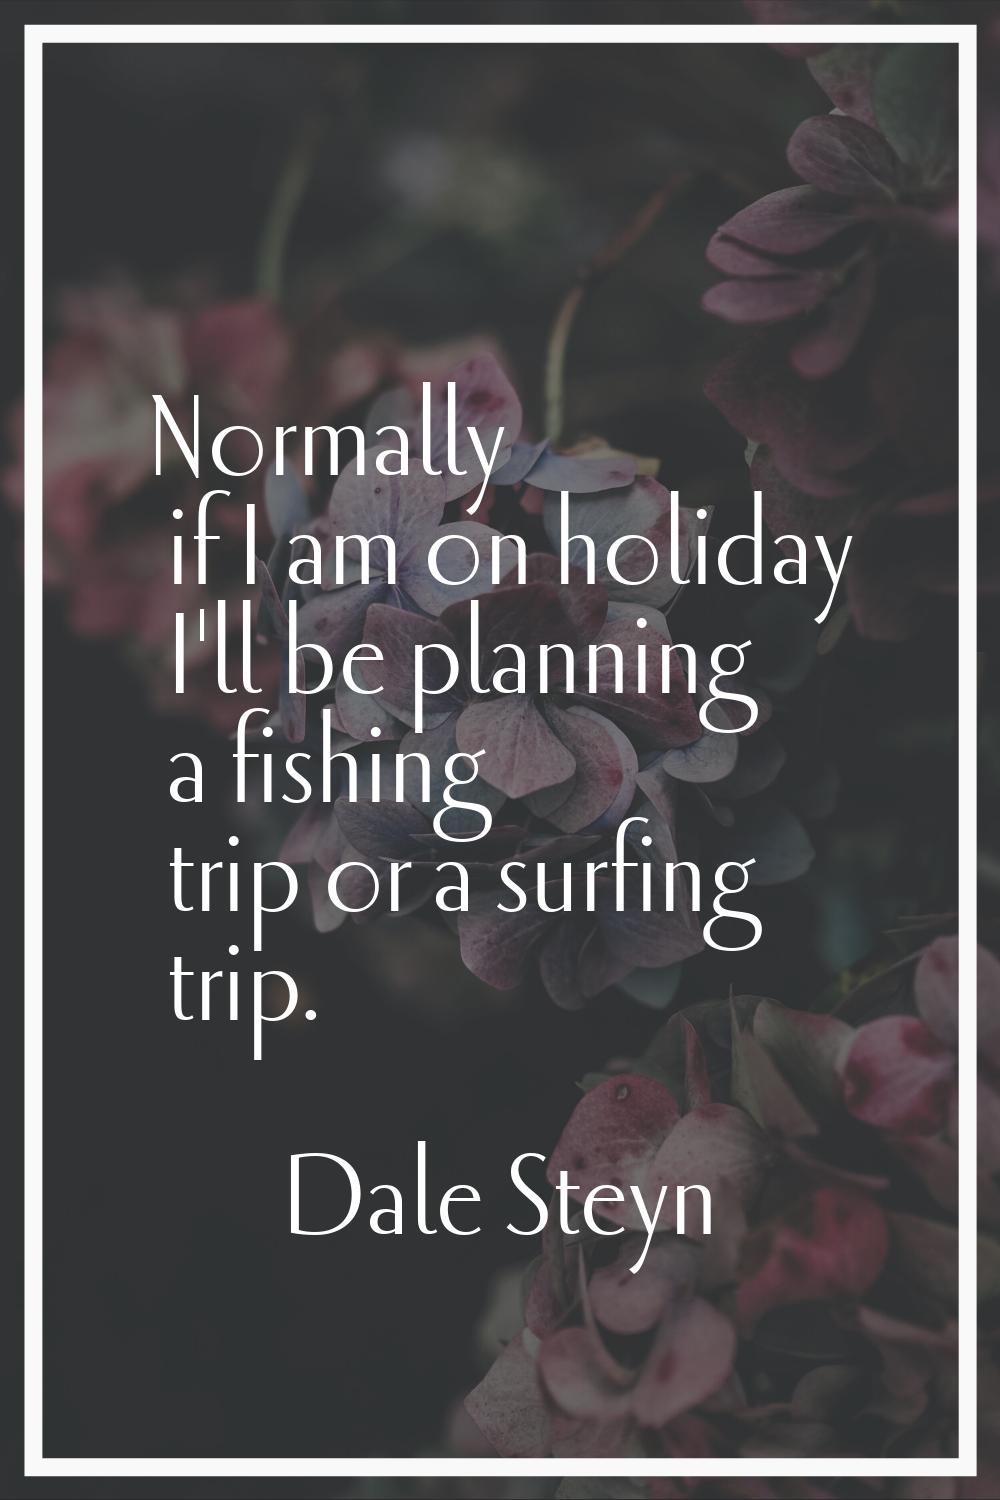 Normally if I am on holiday I'll be planning a fishing trip or a surfing trip.